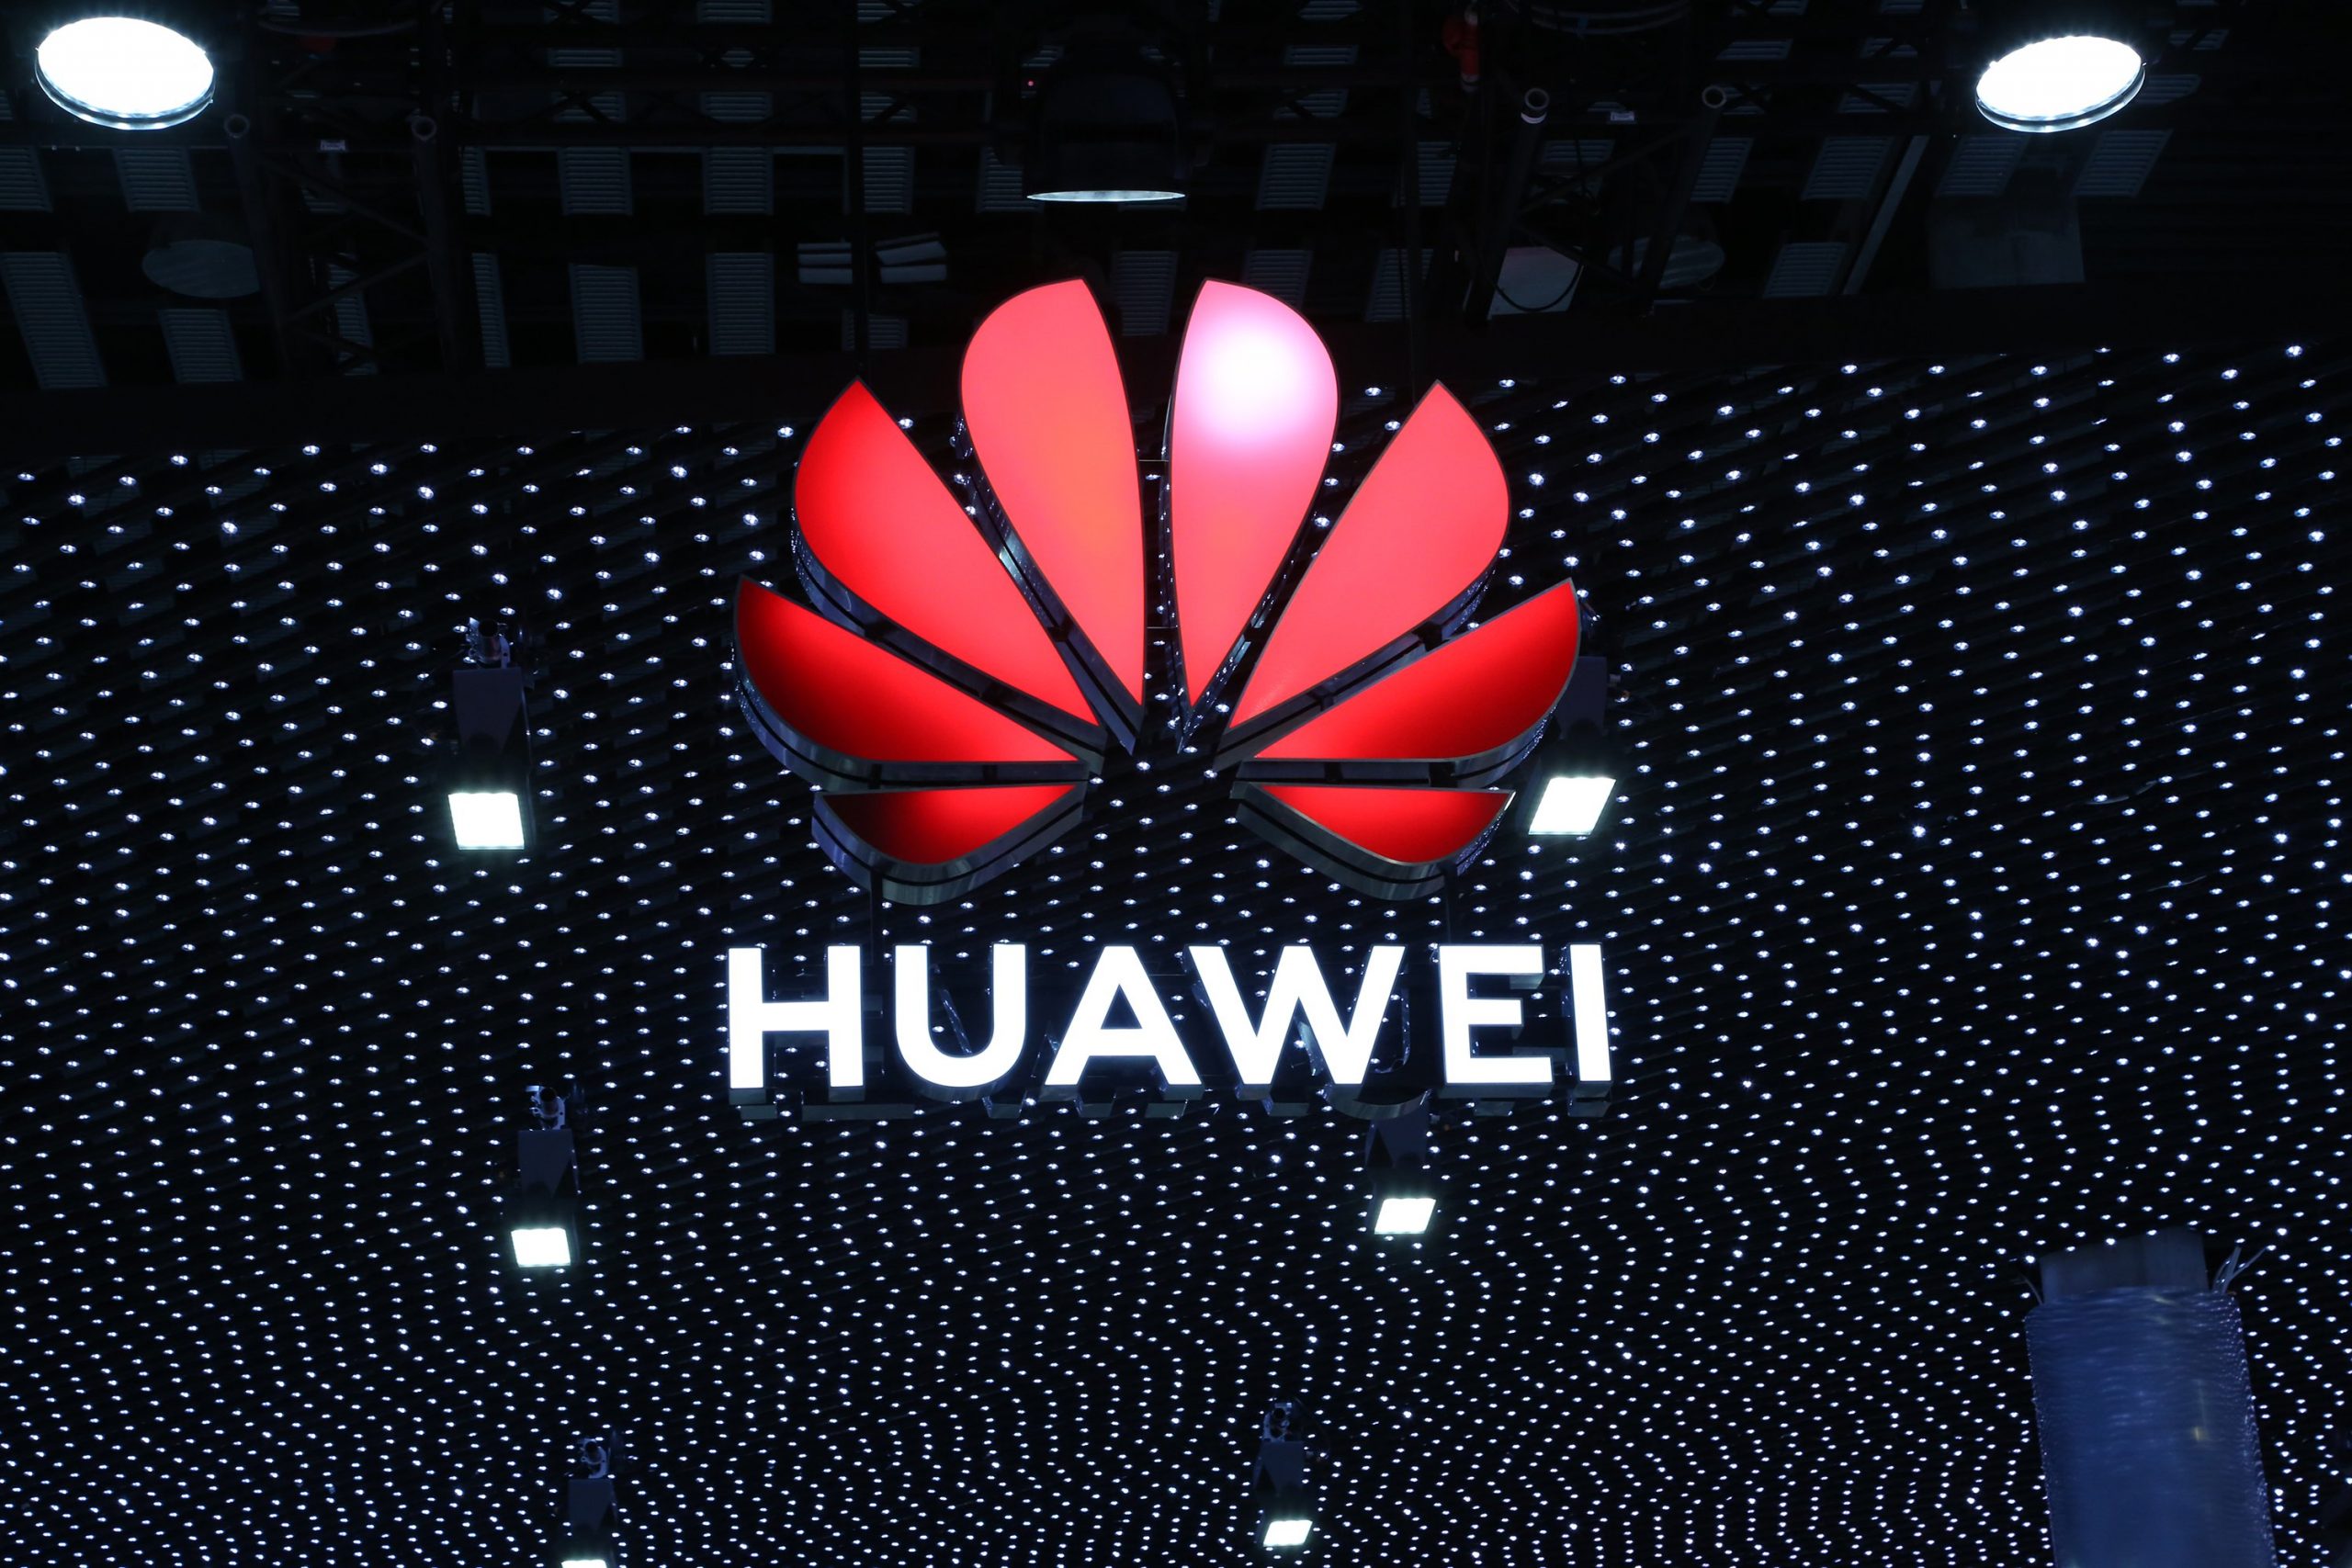 Huawei will reportedly launch the flagship Huawei P50 in H1 2021